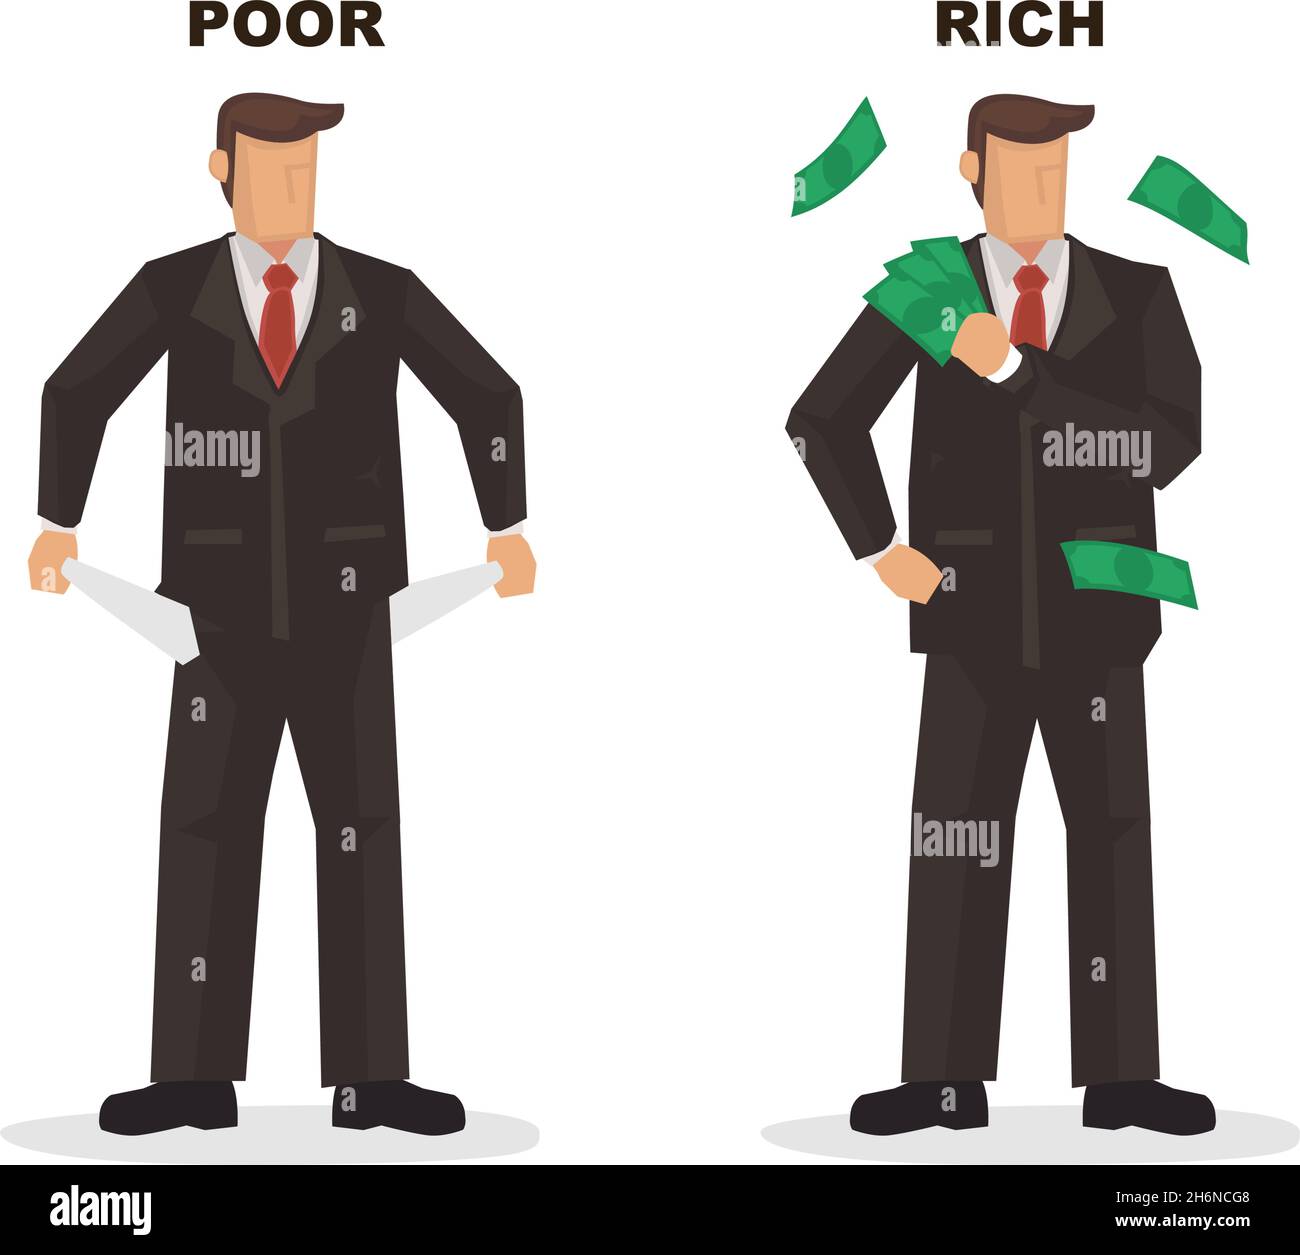 Poor and rich businessman. Flat isolated vector illustration. Stock Vector